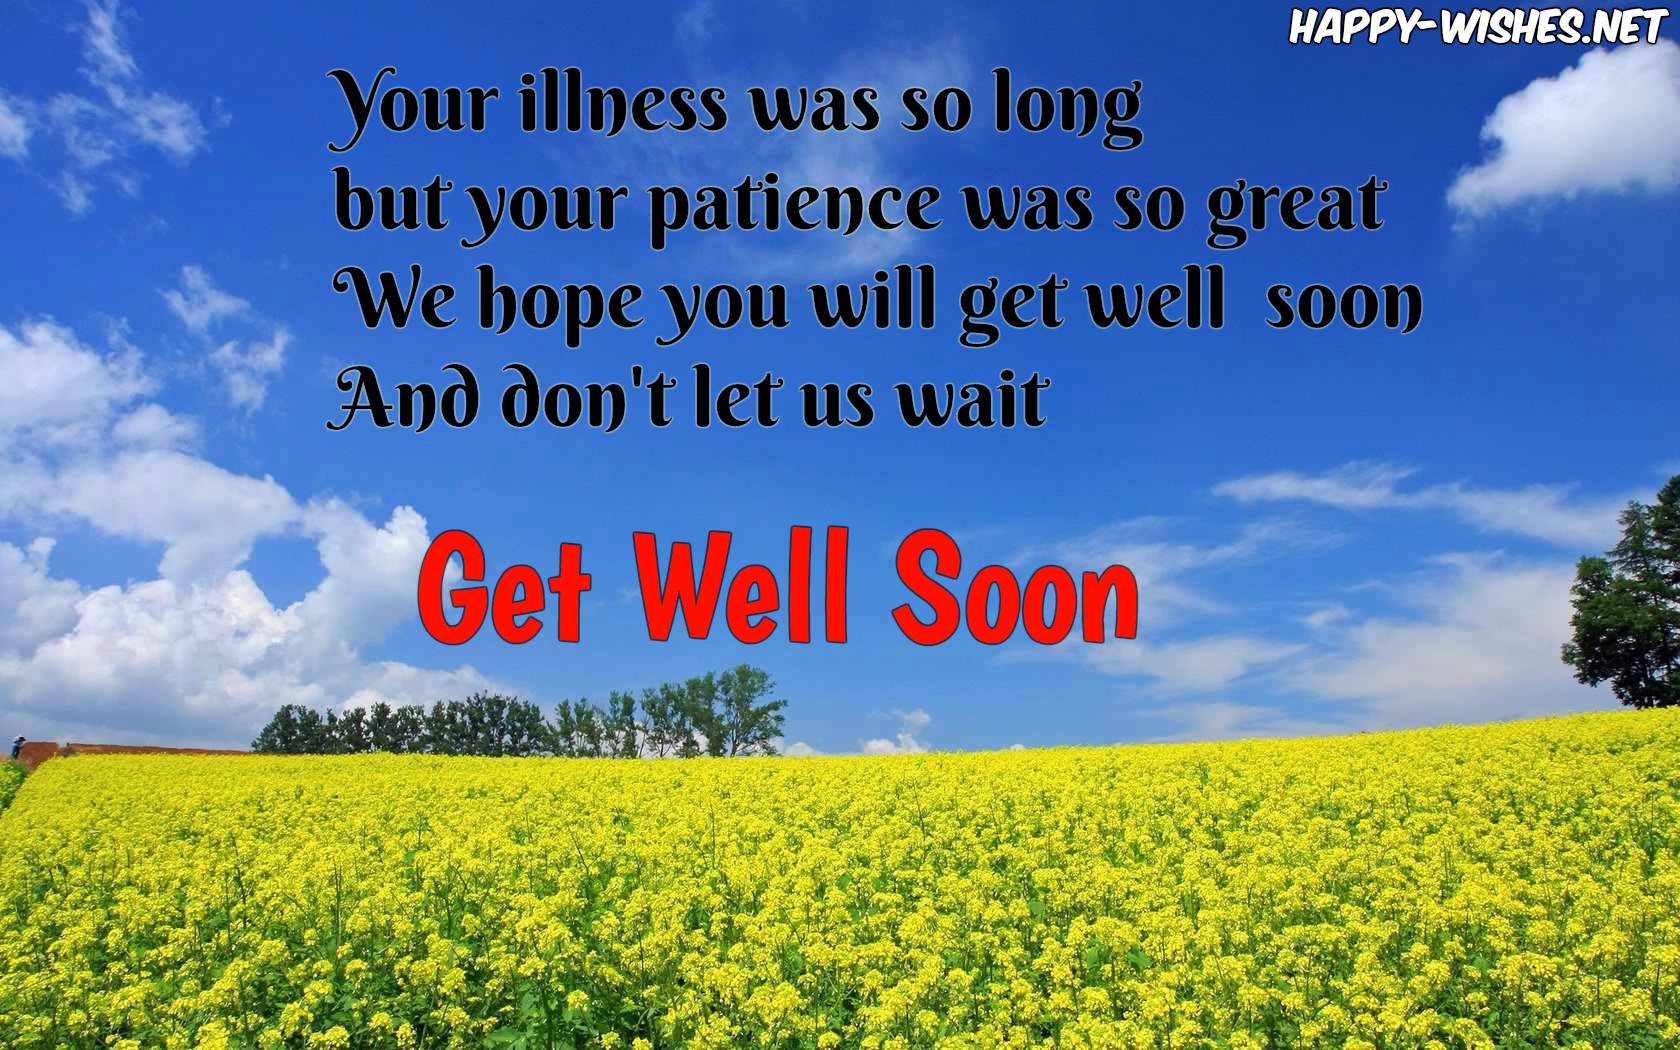 GET Well soon messages